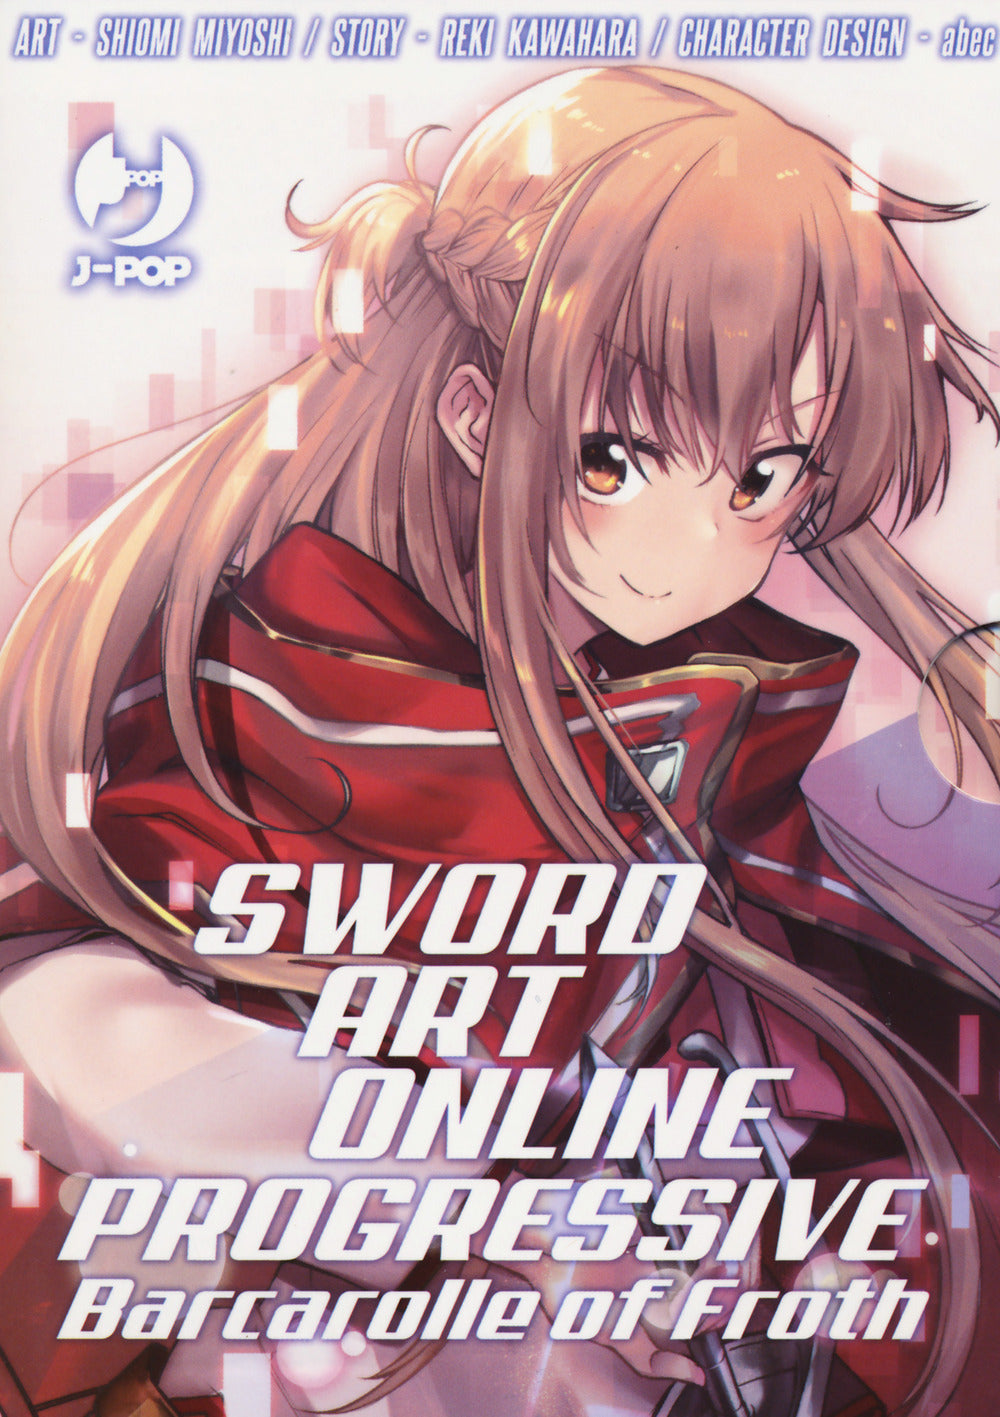 Barcarolle of Froth. Sword art online. Progressive. Collection box. Vol. 1-2.